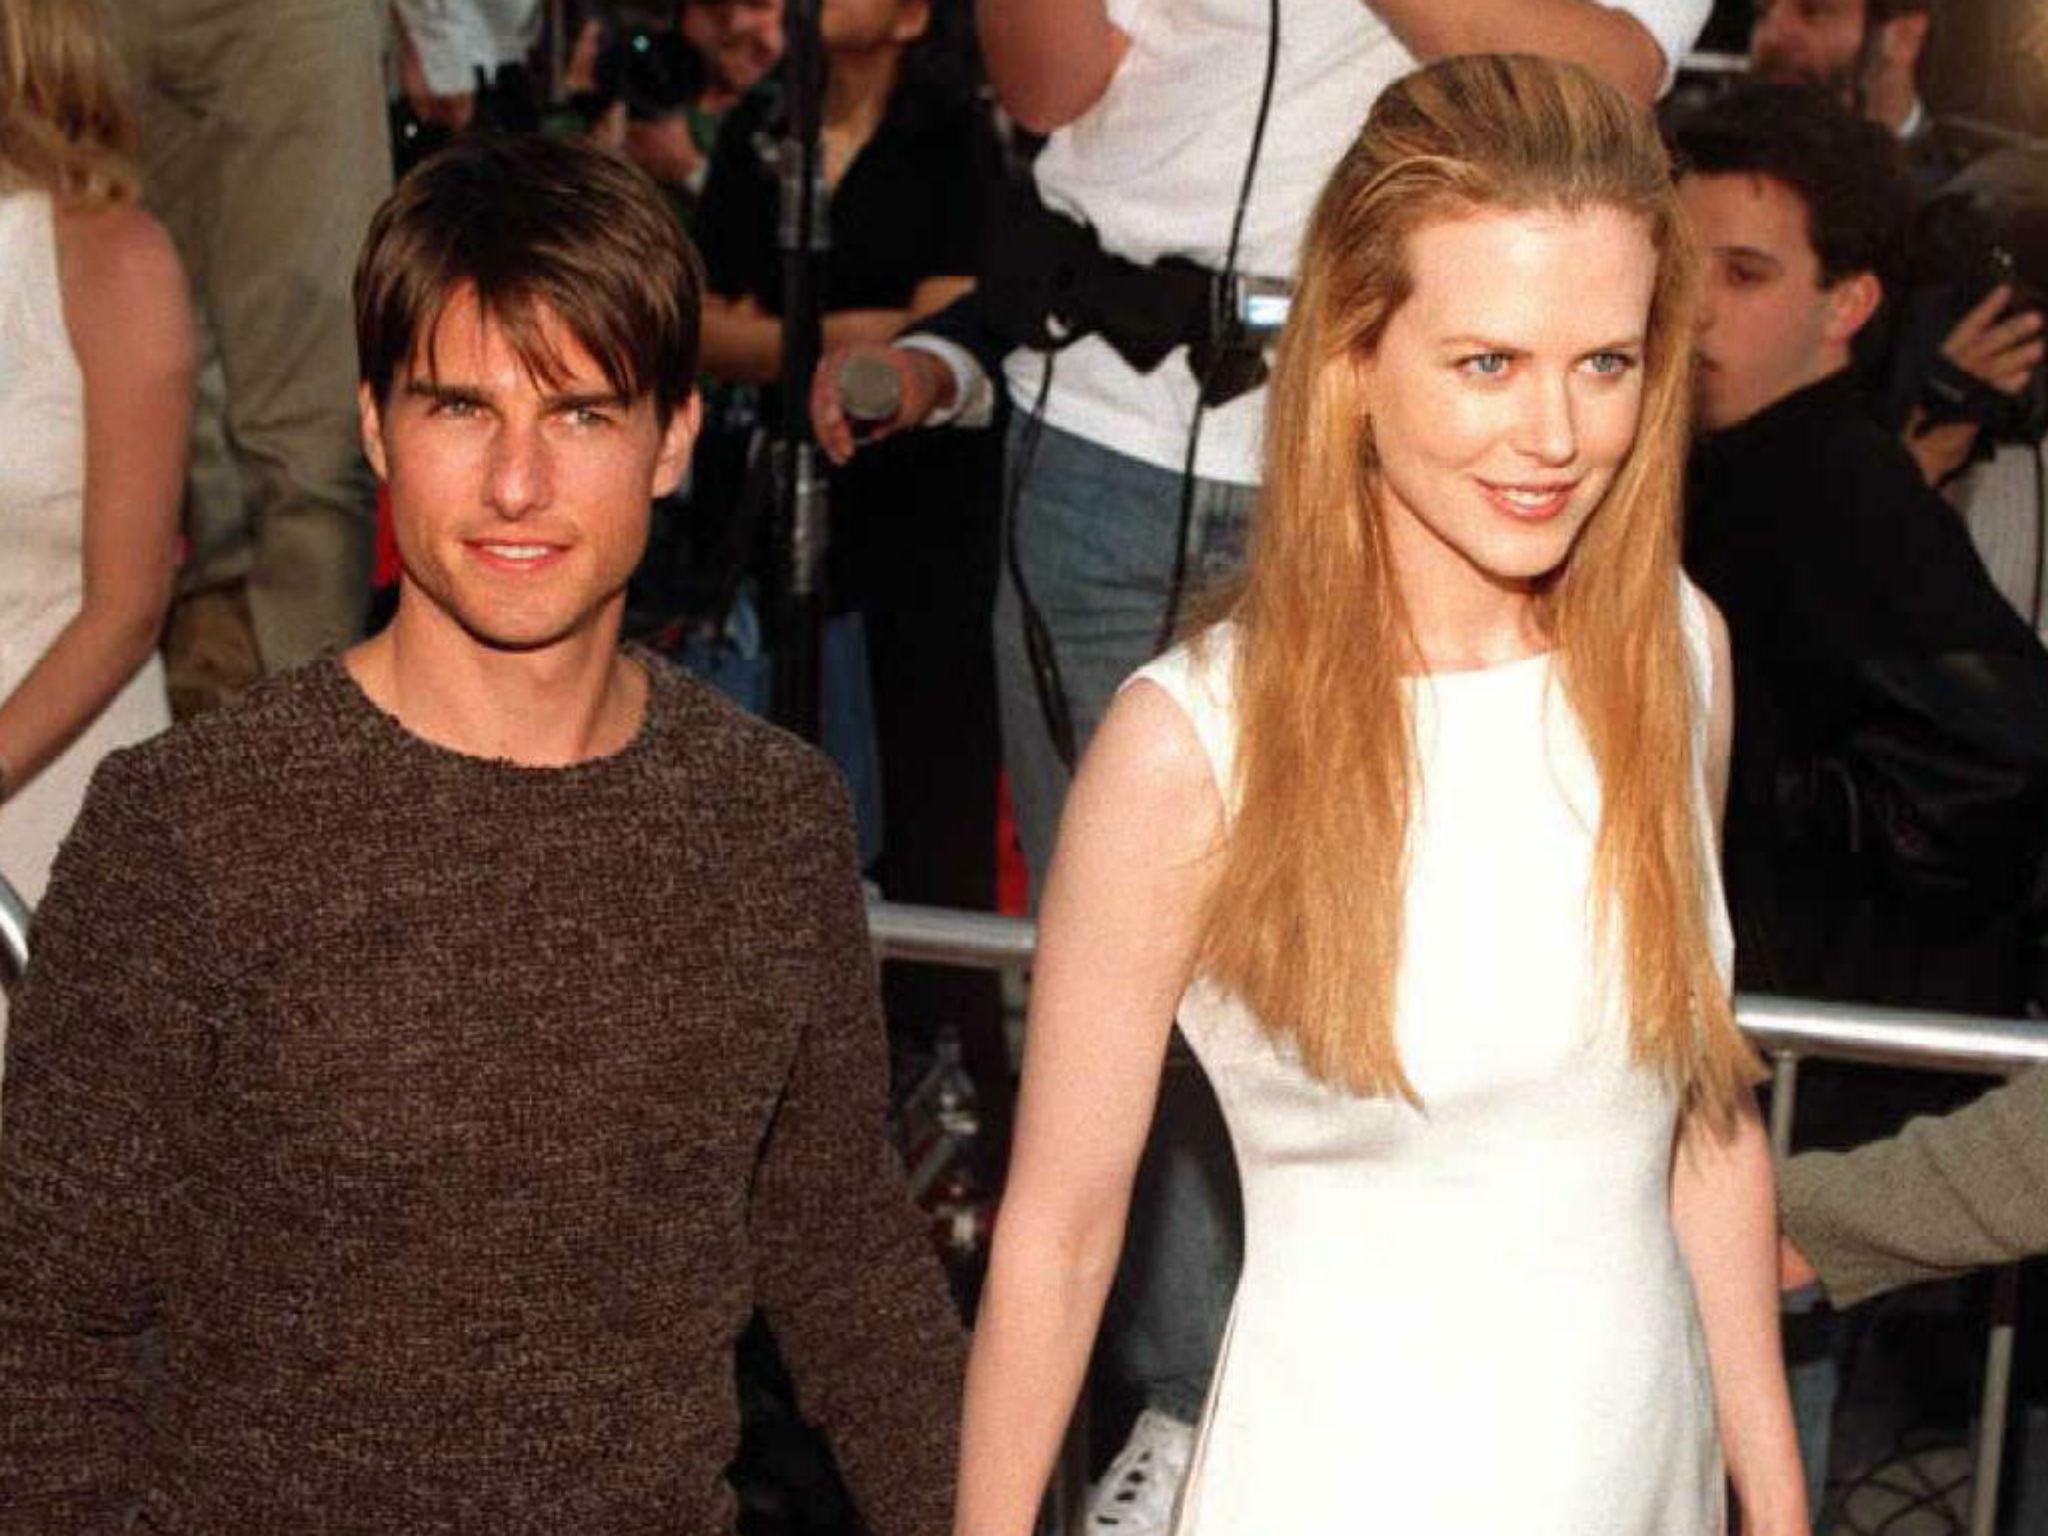 Nicole Kidman on marrying Tom Cruise at age 23: 'I look back now and I'm like, what?' | The Independent | The Independent